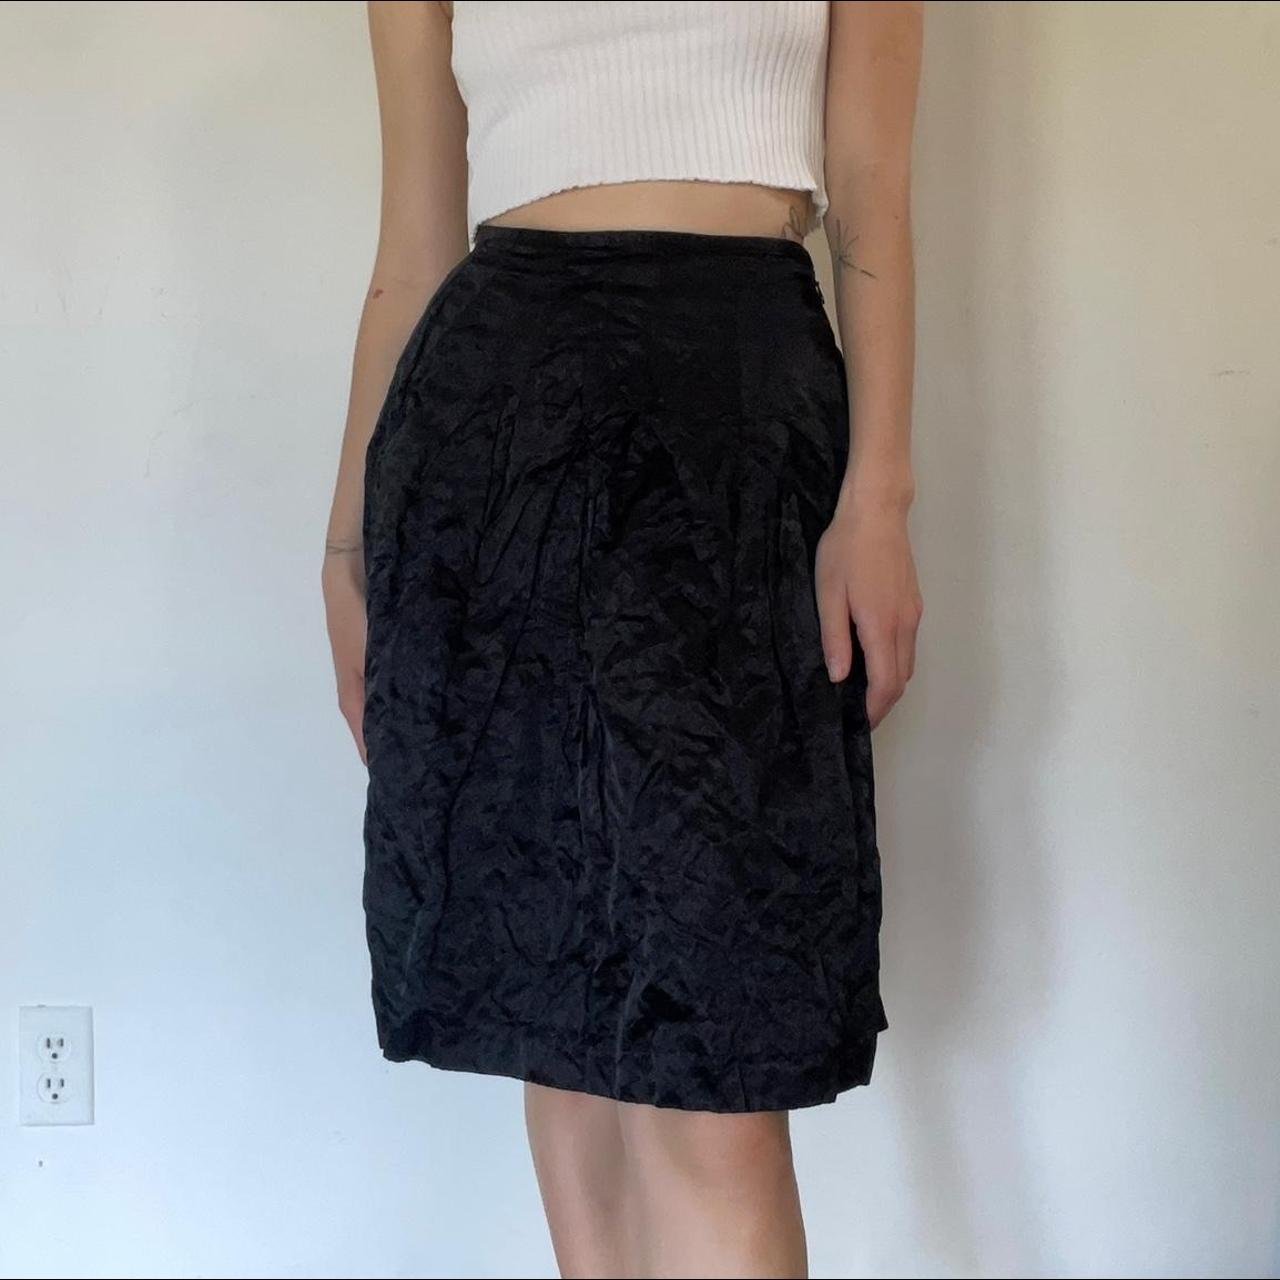 Product Image 3 - Jigsaw wrinkle skirt. Supposed to